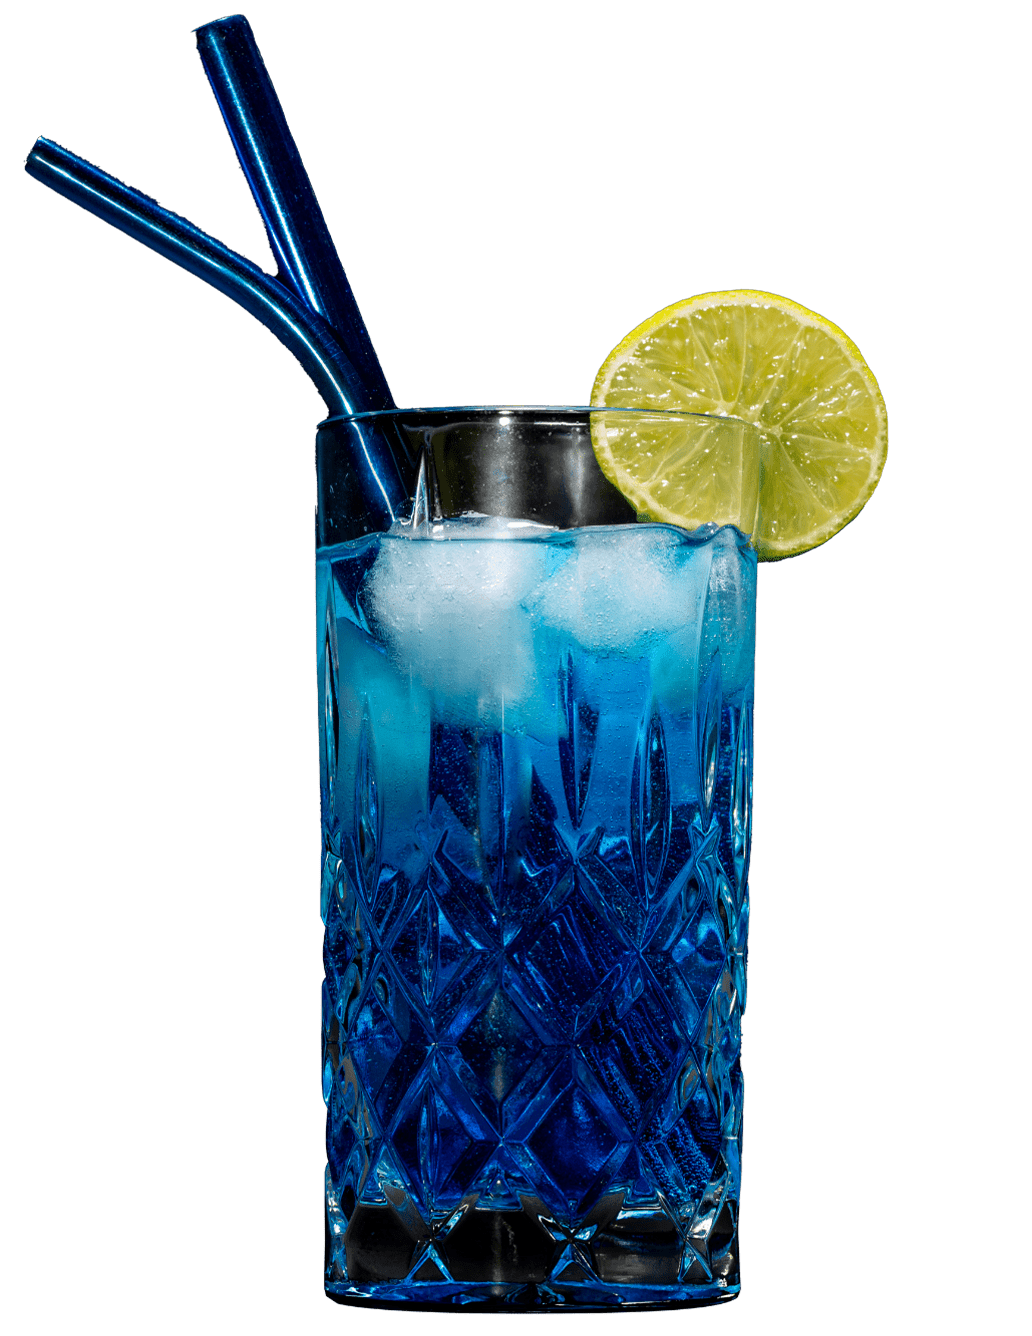 Metal straw in a glass